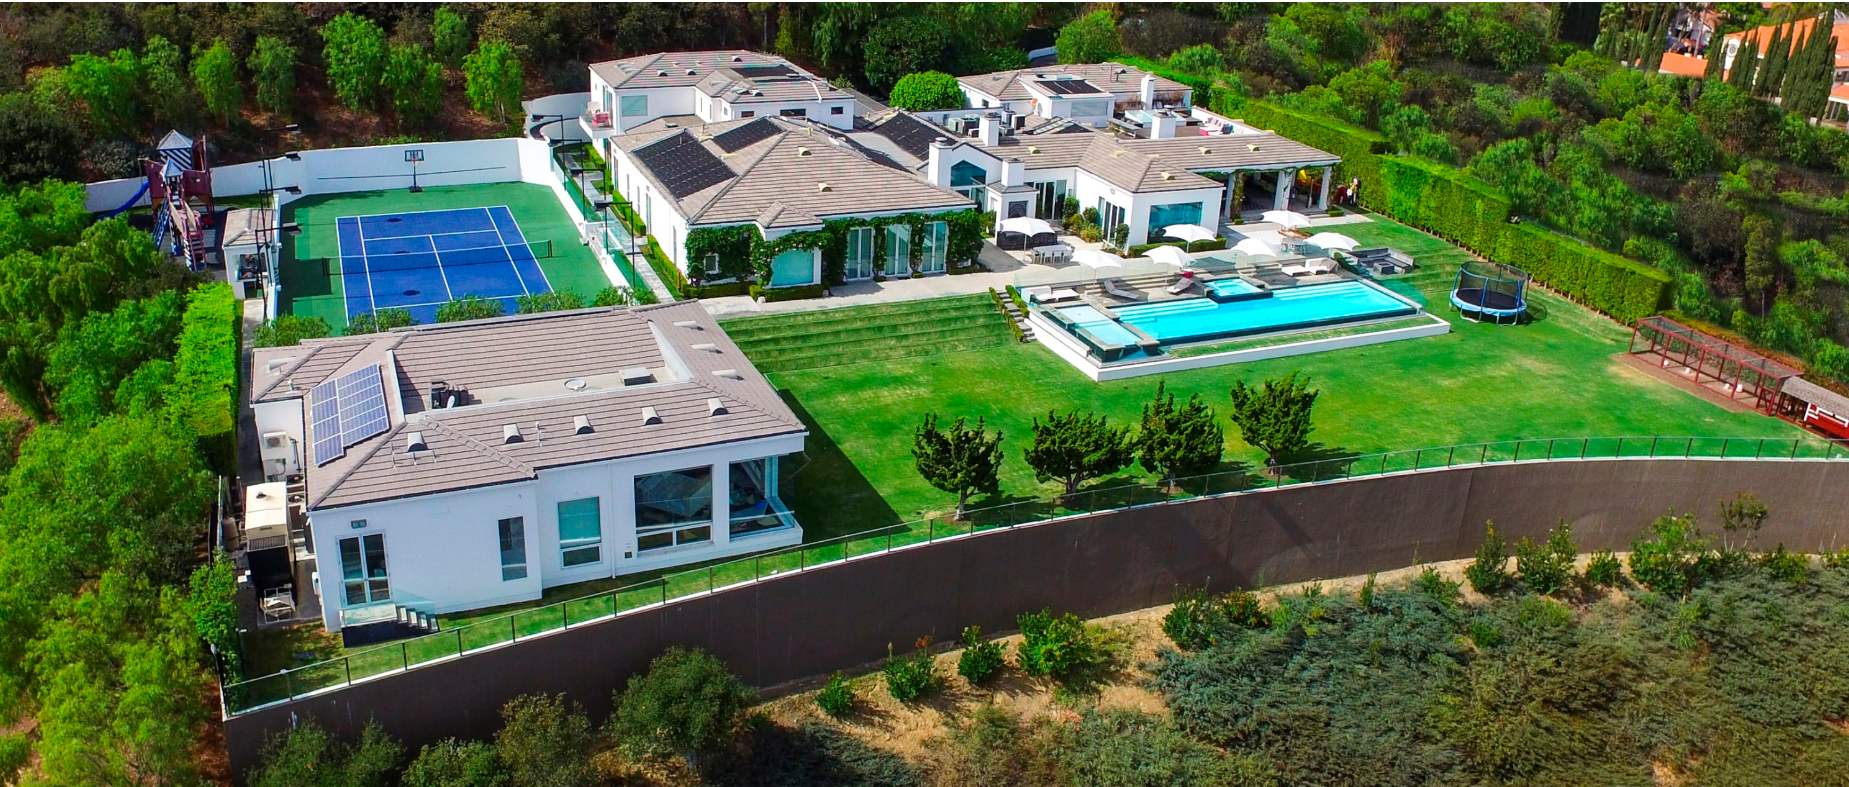 Gwen Stefani wants to sell the estate.  She lowered the price to... $25 million